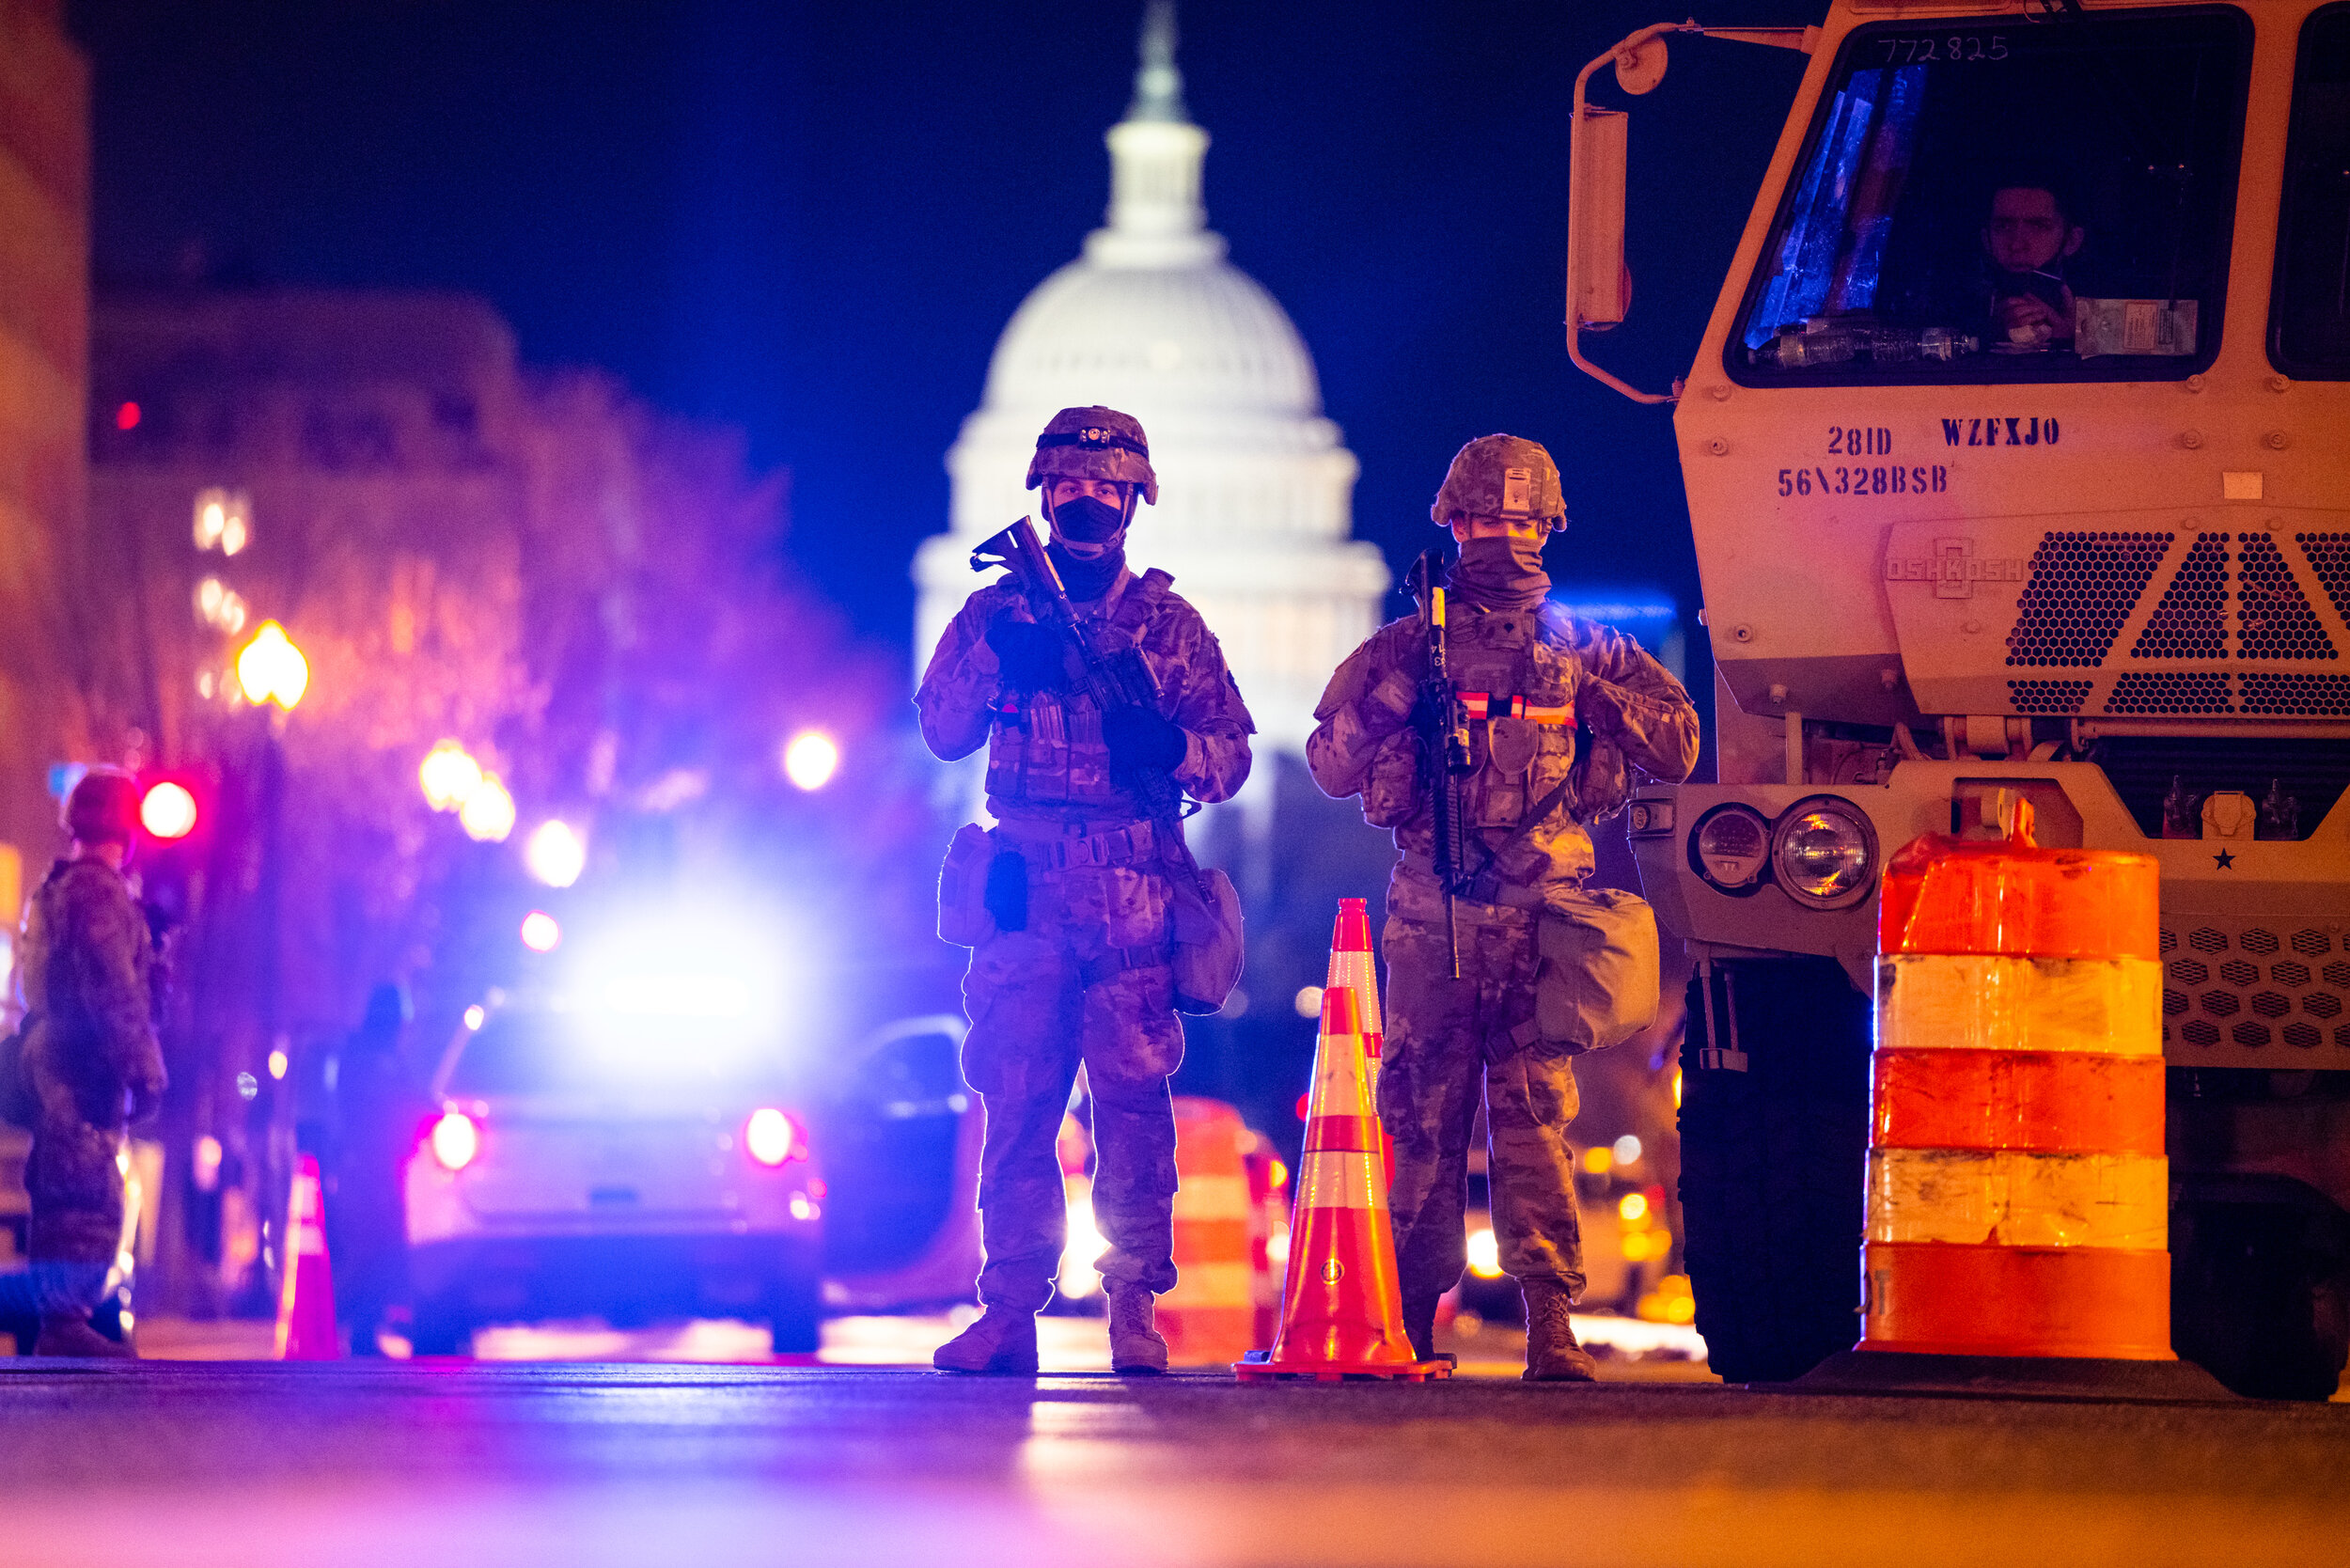  Members of the National Guard and DC Police form a perimeter around the Capitol Building in downtown DC ahead of the 2021 Inauguration a week after right wing groups invaded the building.  